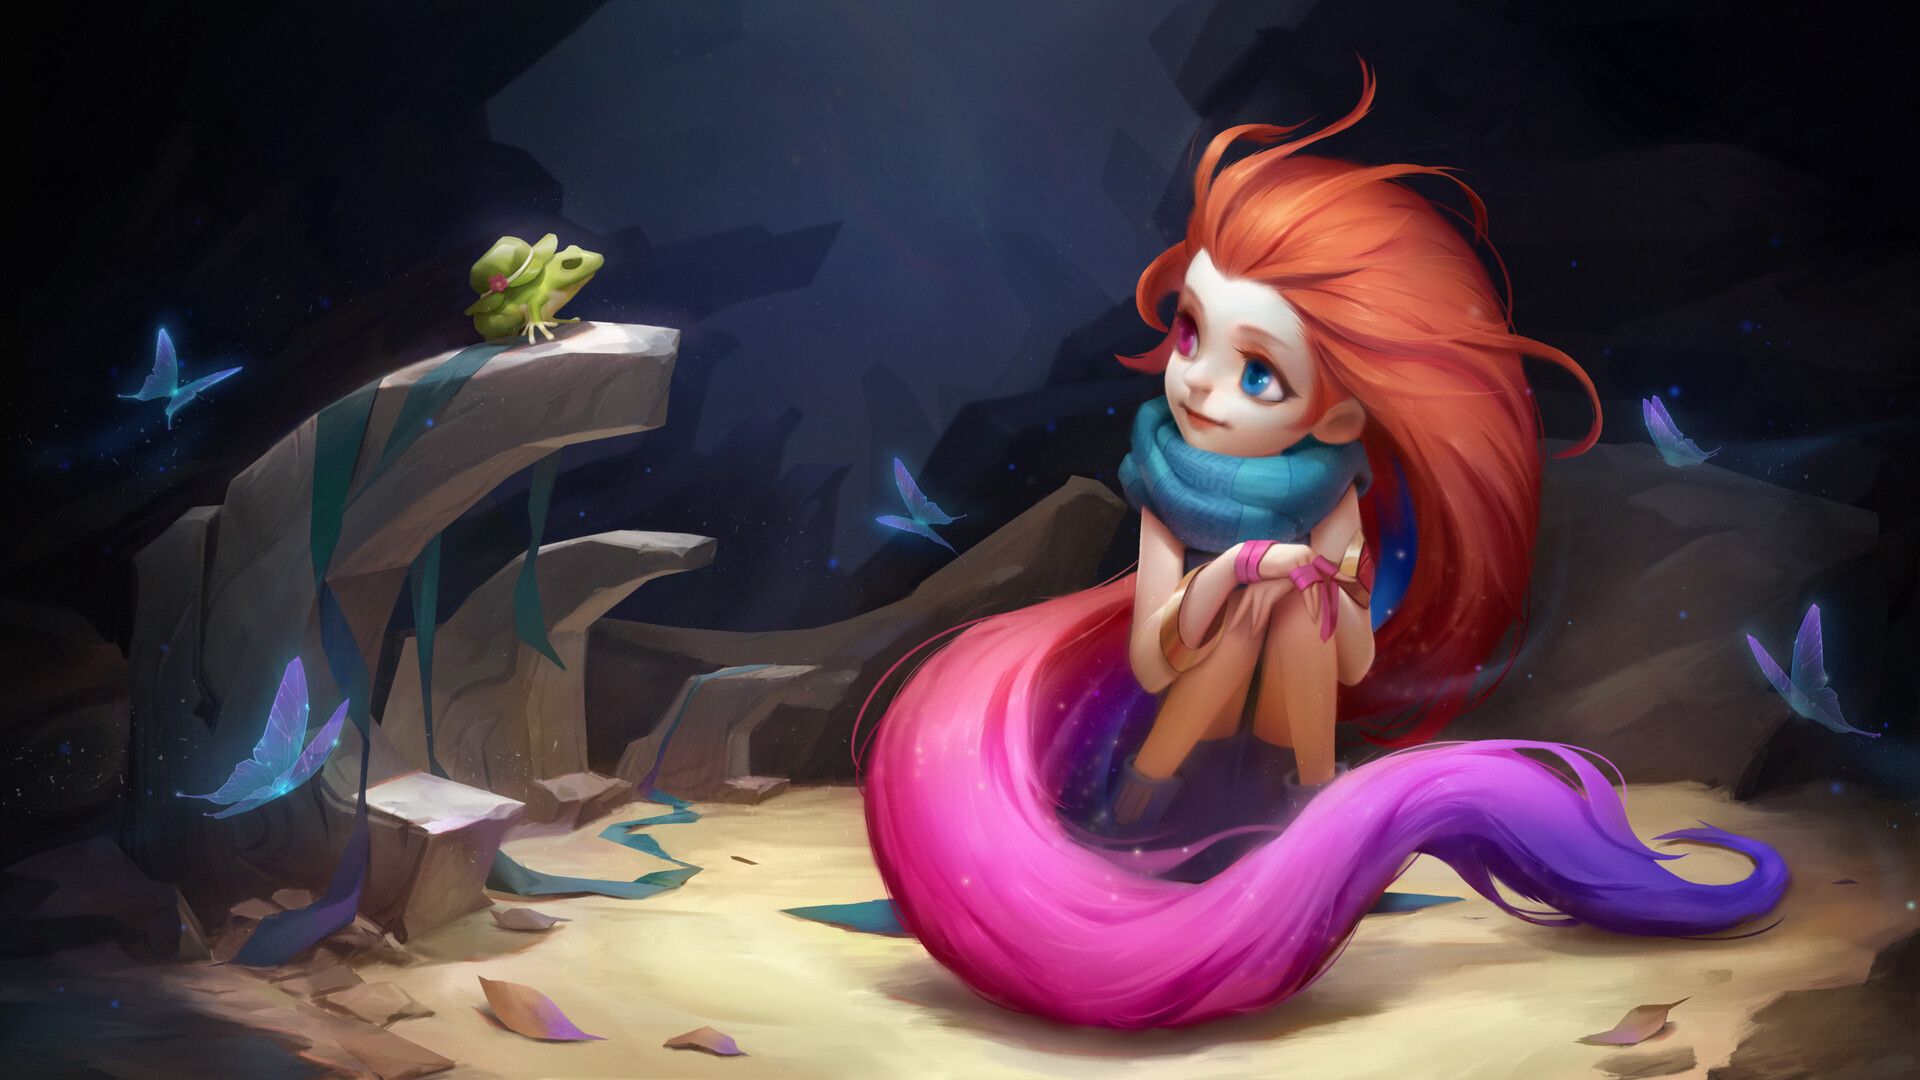 Zoe League Of Legends Wallpaper, HD Games 4K Wallpapers, Image, Photos and ...